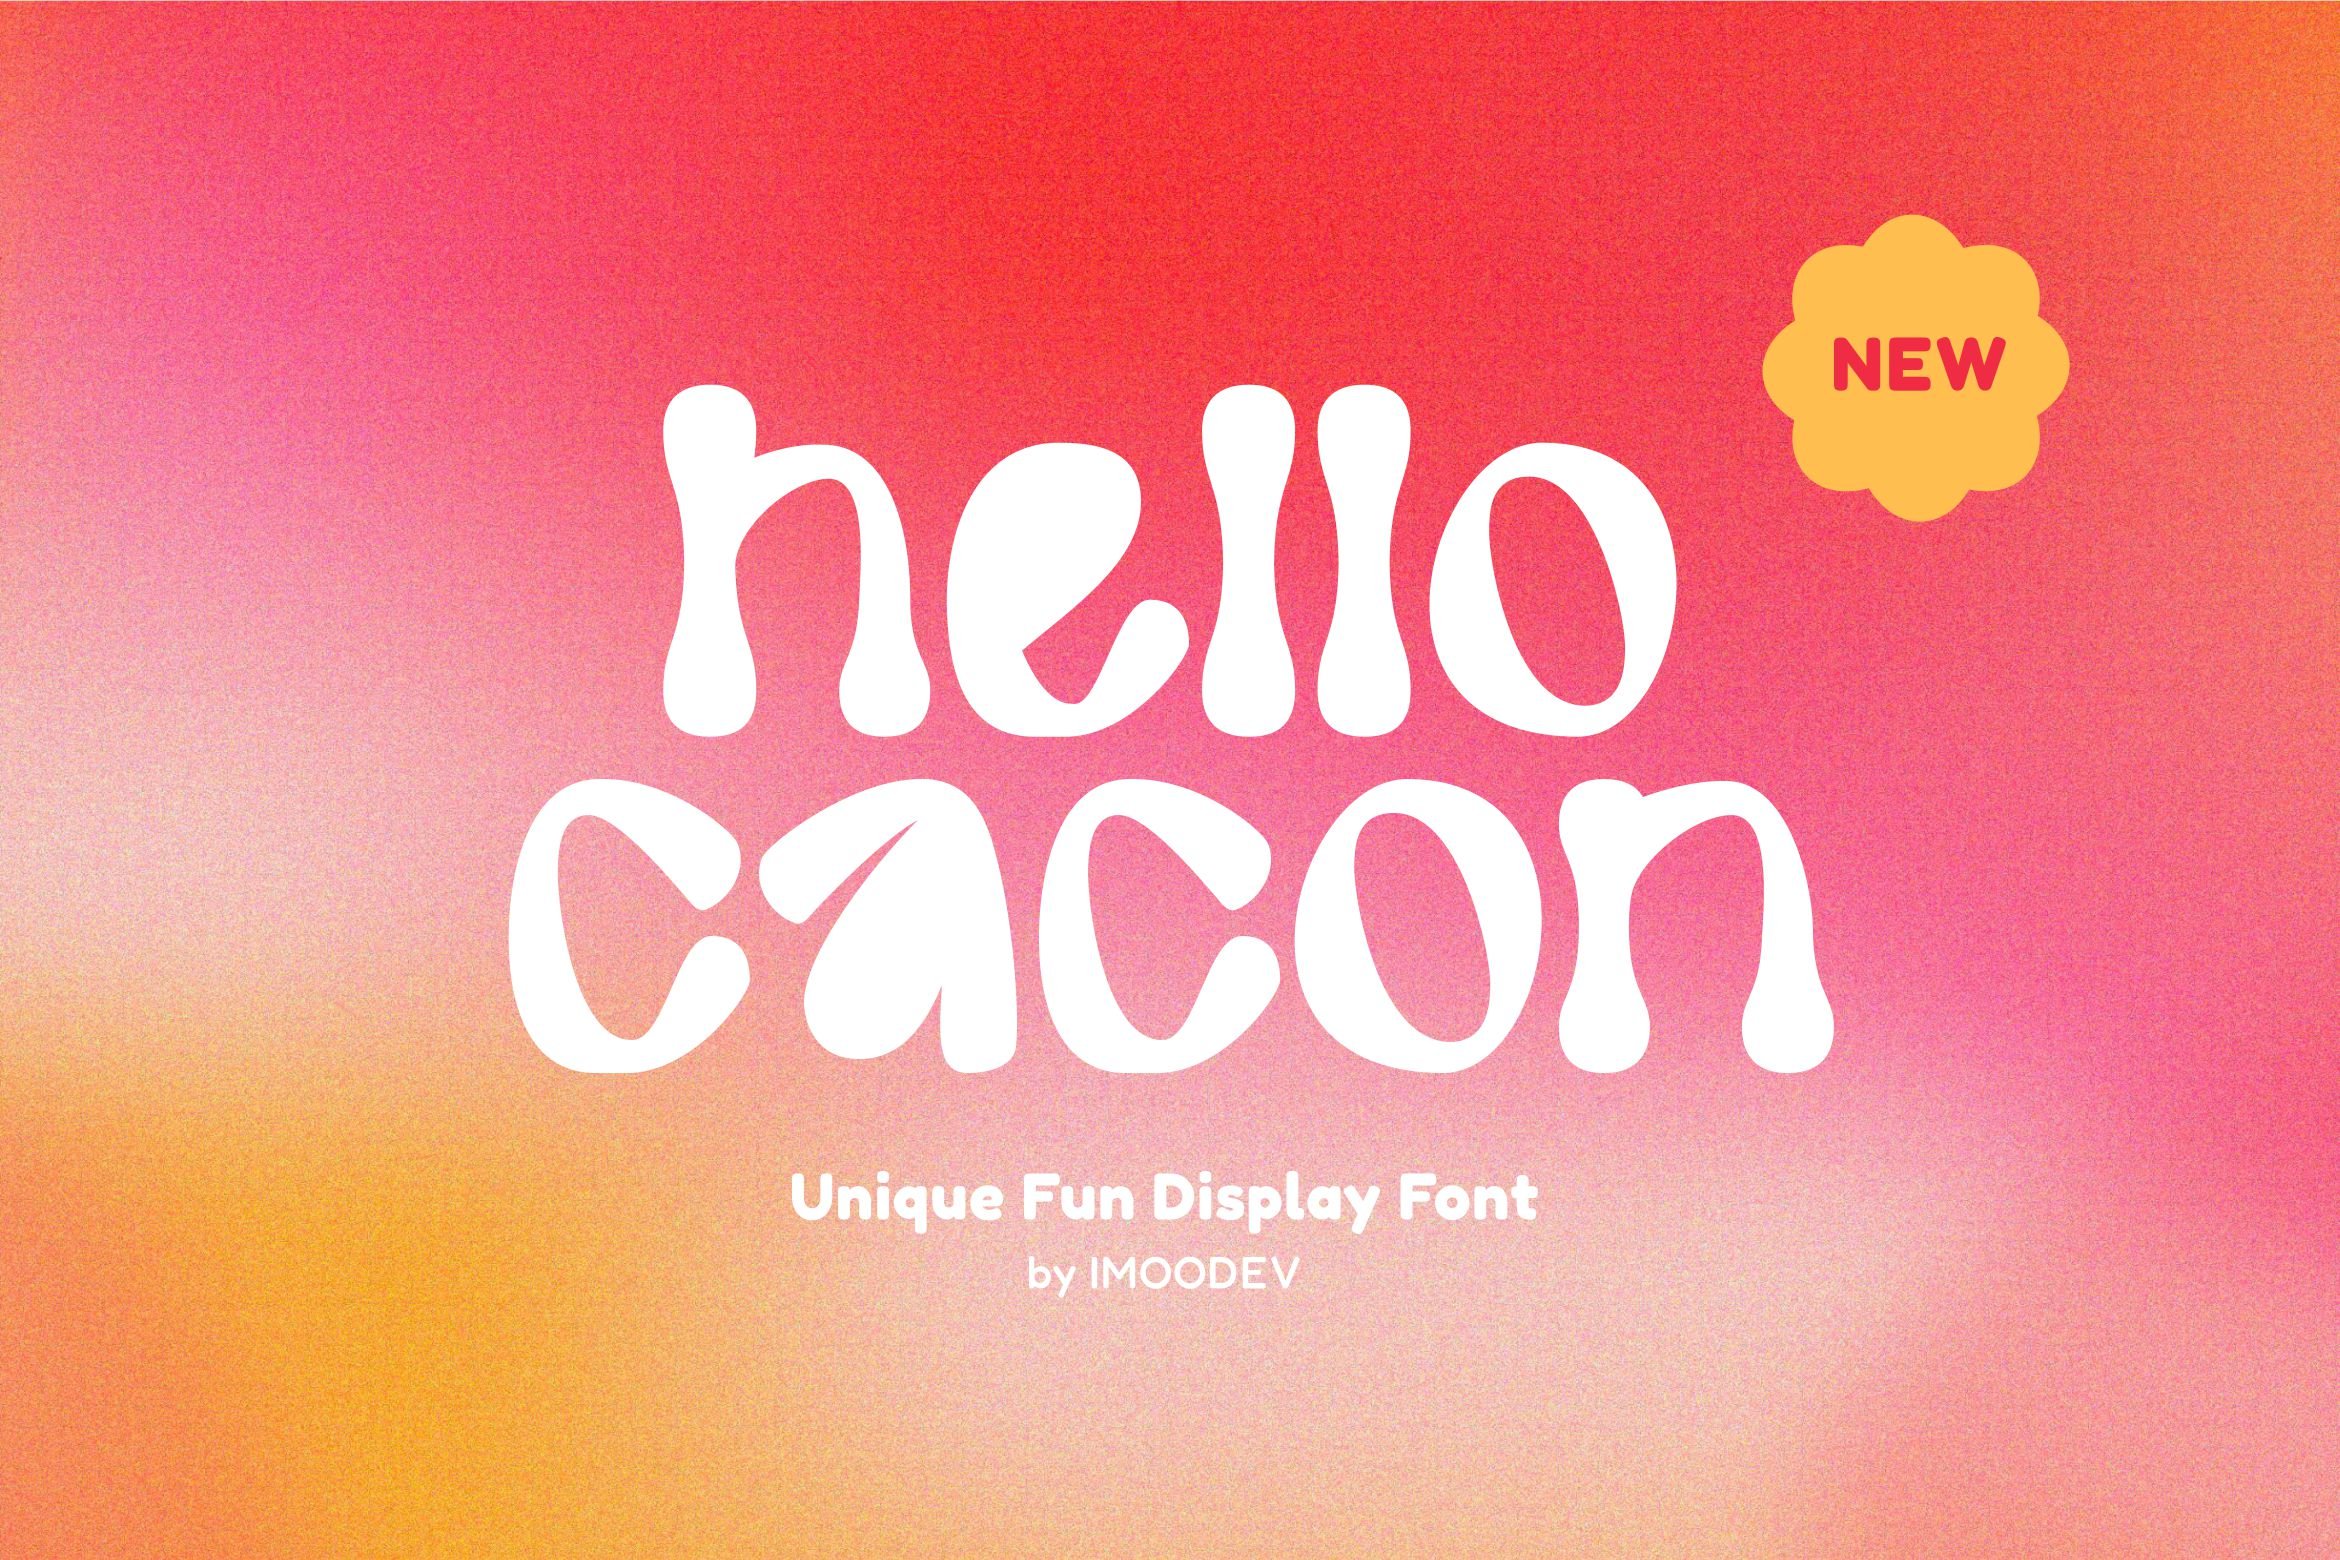 Hello Cacon - Display Typeface cover image.